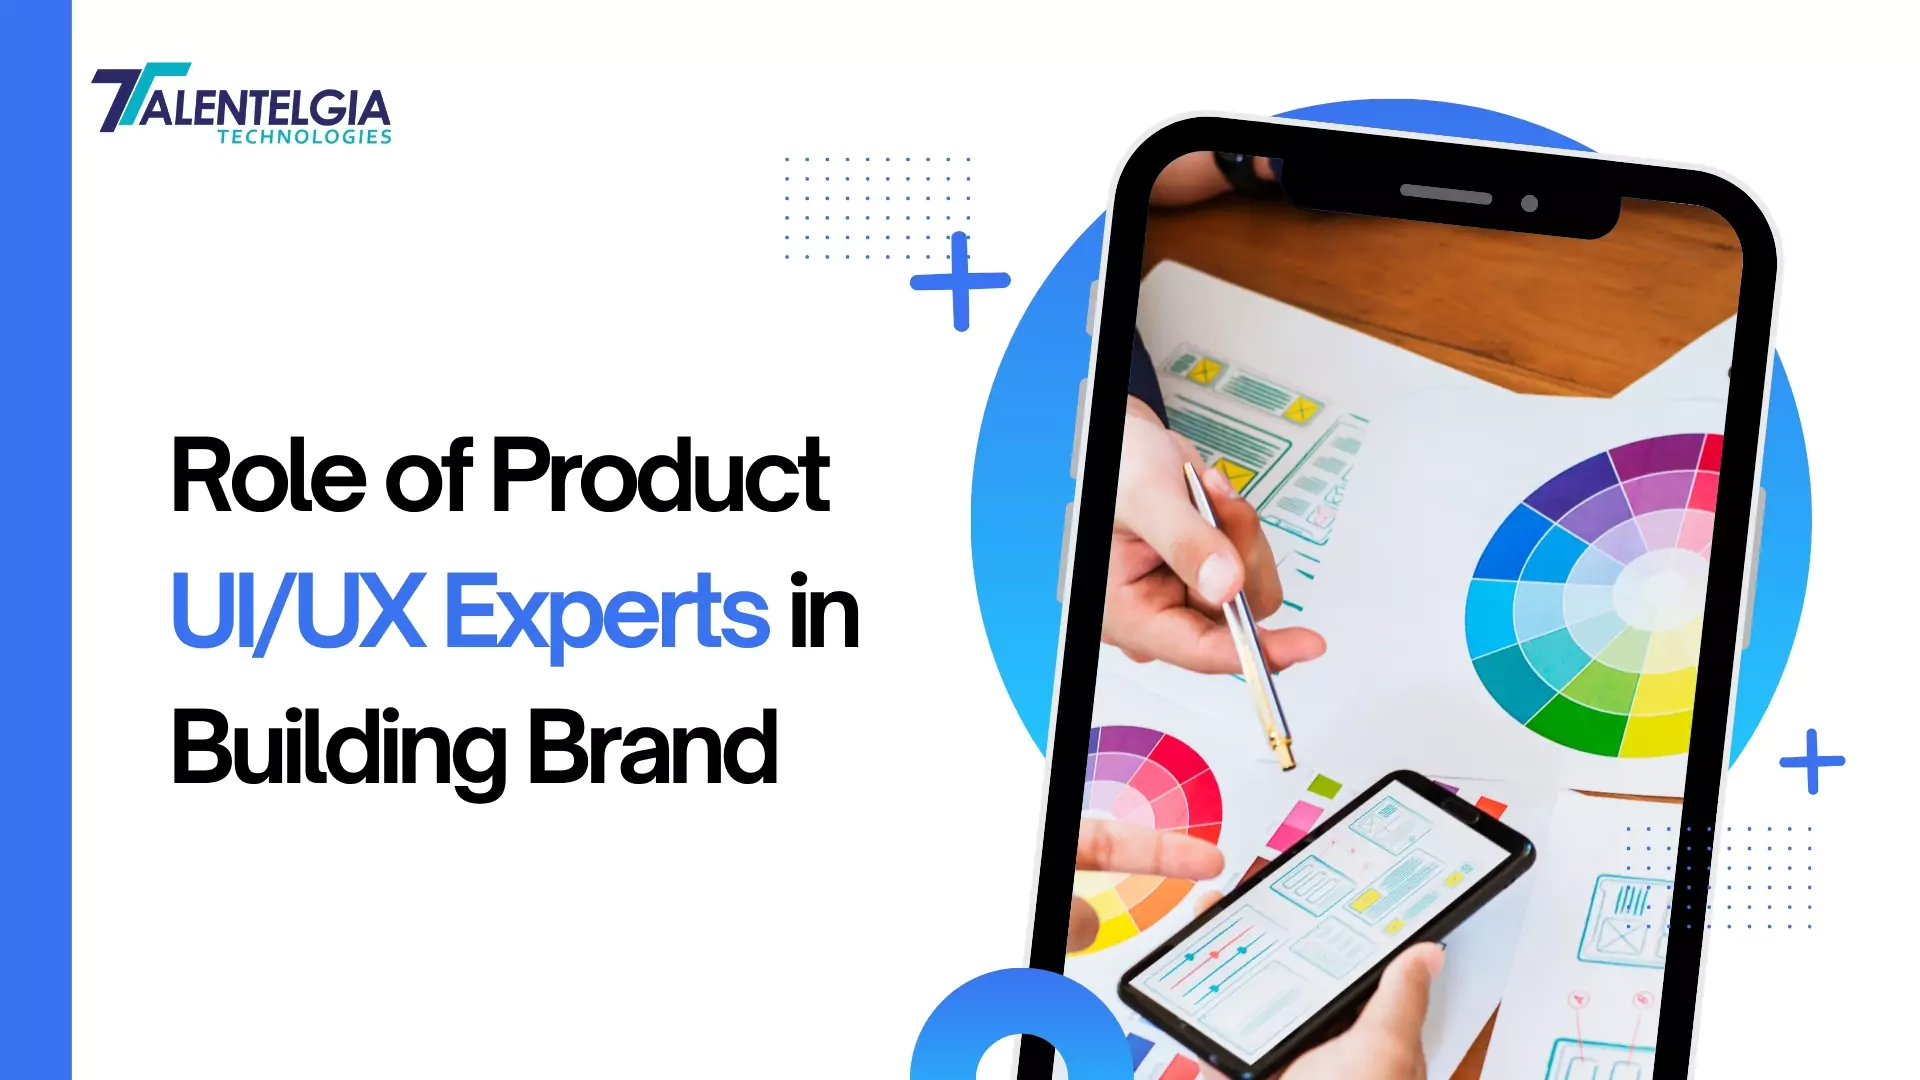 The Role of Product UI/UX Experts in Building Brand Loyalty and Trust